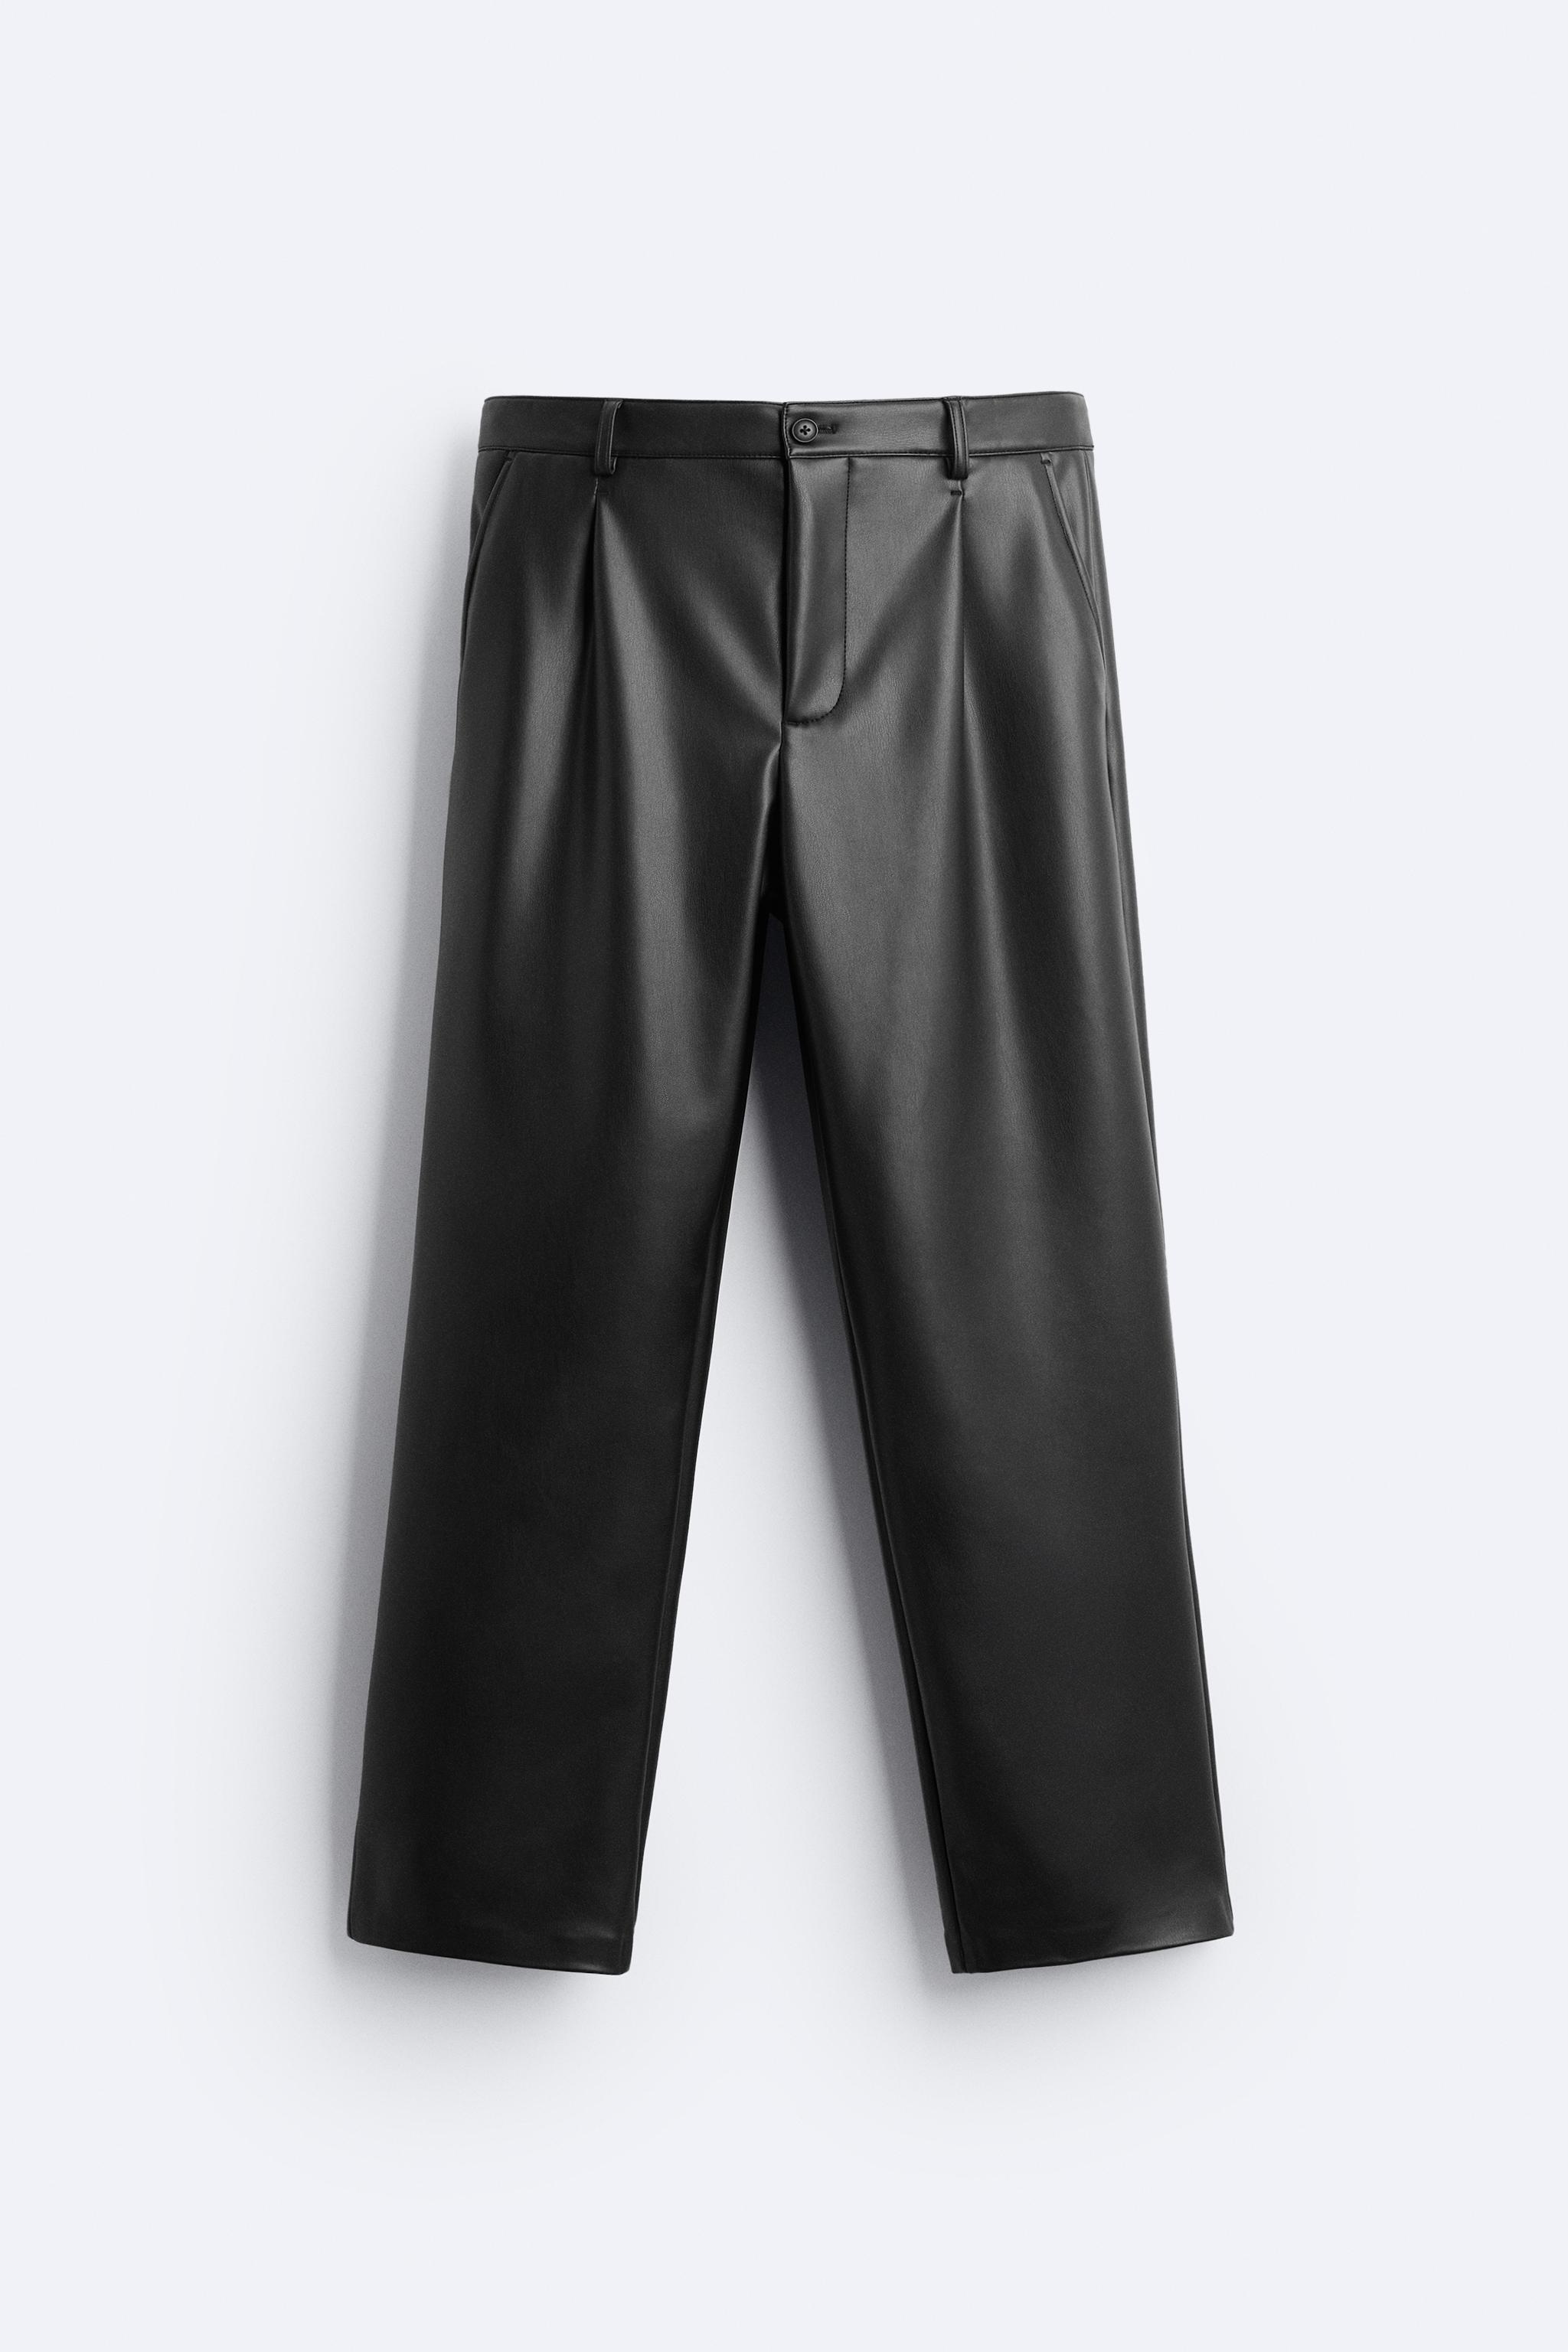 Zara Faux Leather Flare Pants with Zipper at hem in Black Size Medium